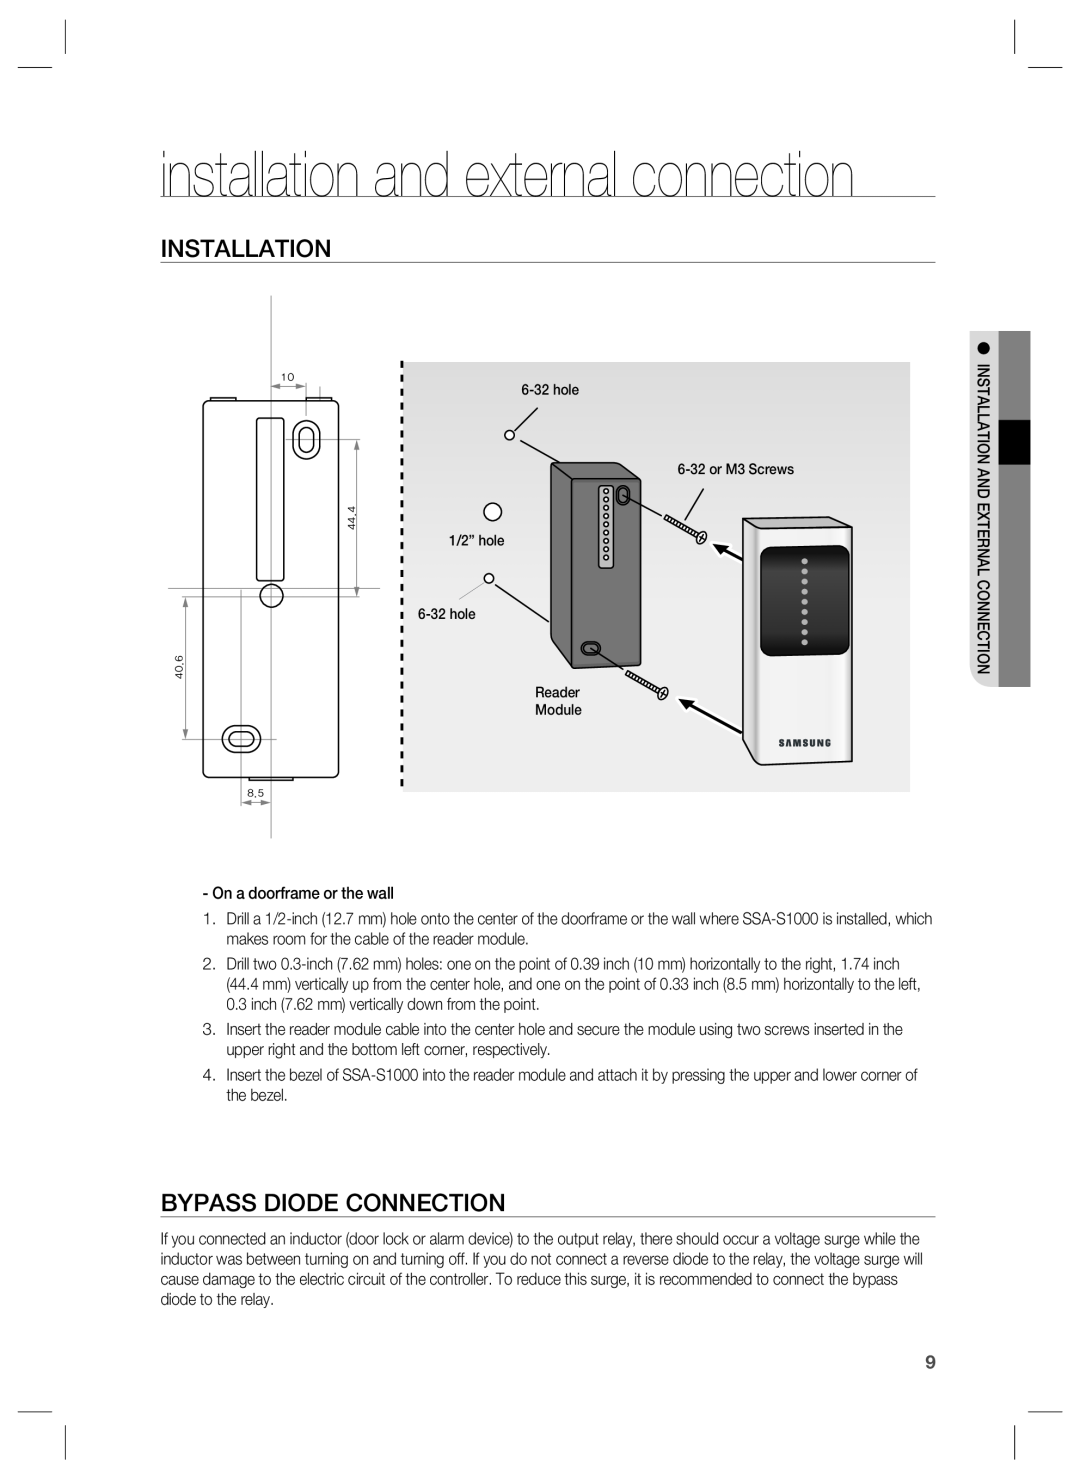 Samsung SSA-S1000 user manual installation and external connection, Installation, Bypass Diode Connection 